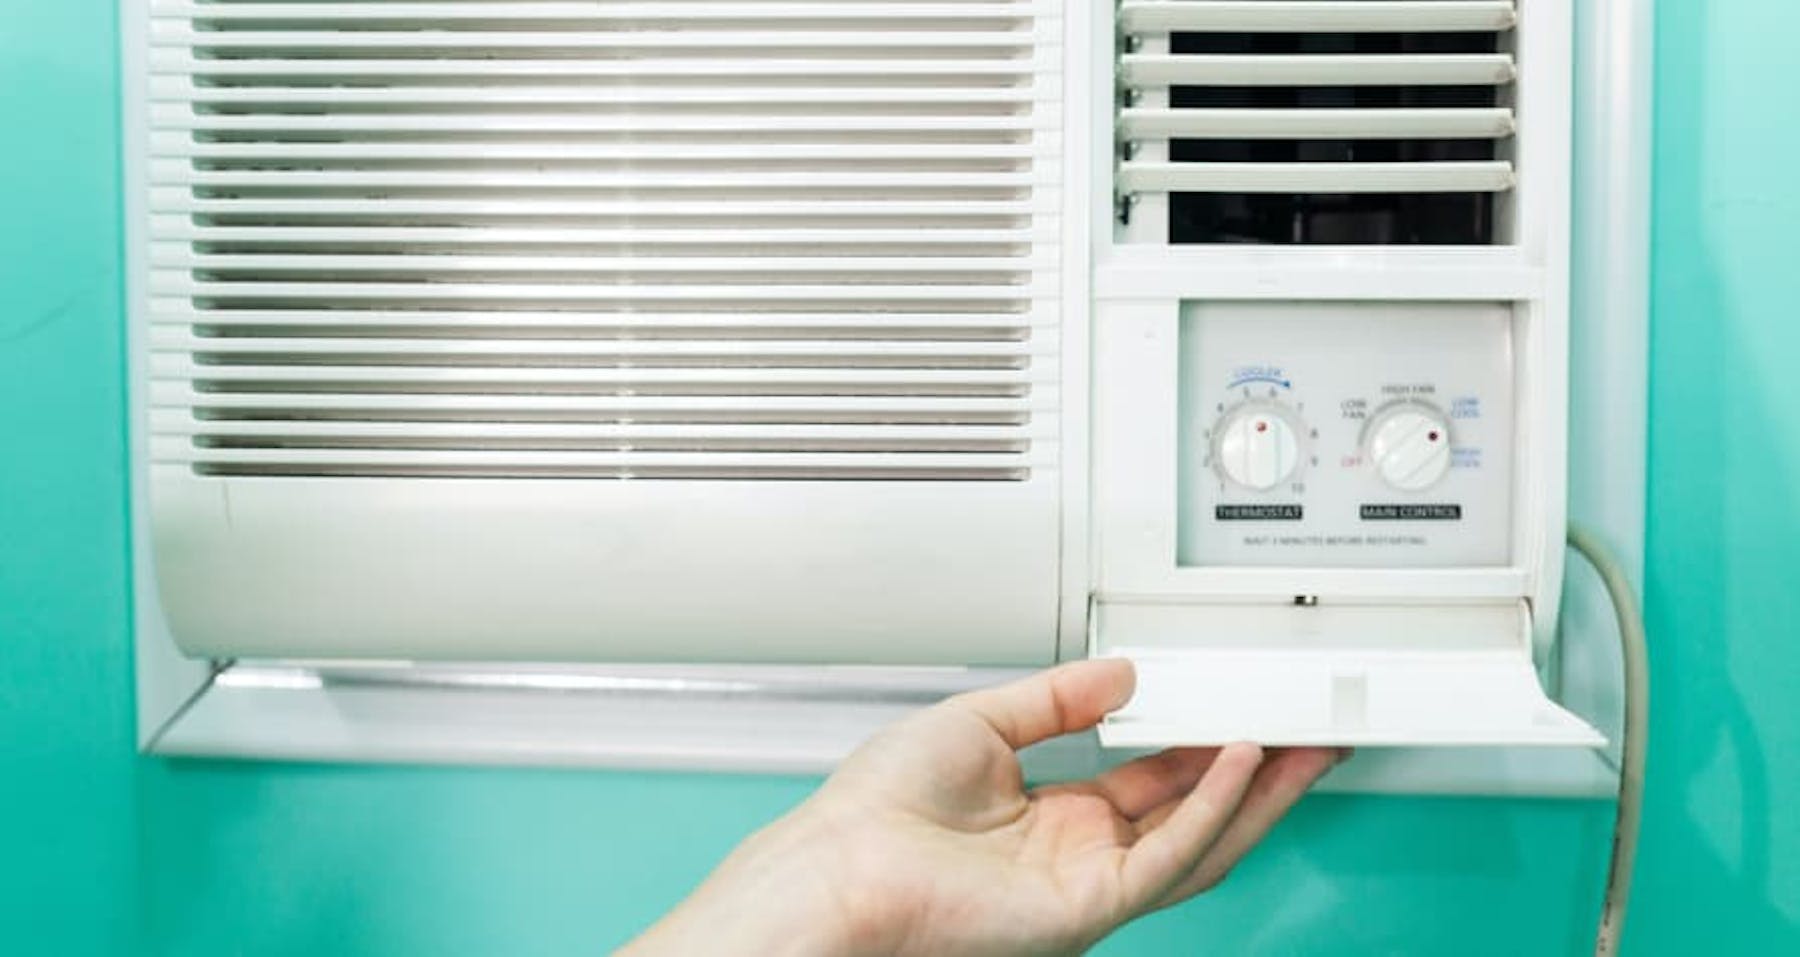 picutre of modern air conditioner and settings